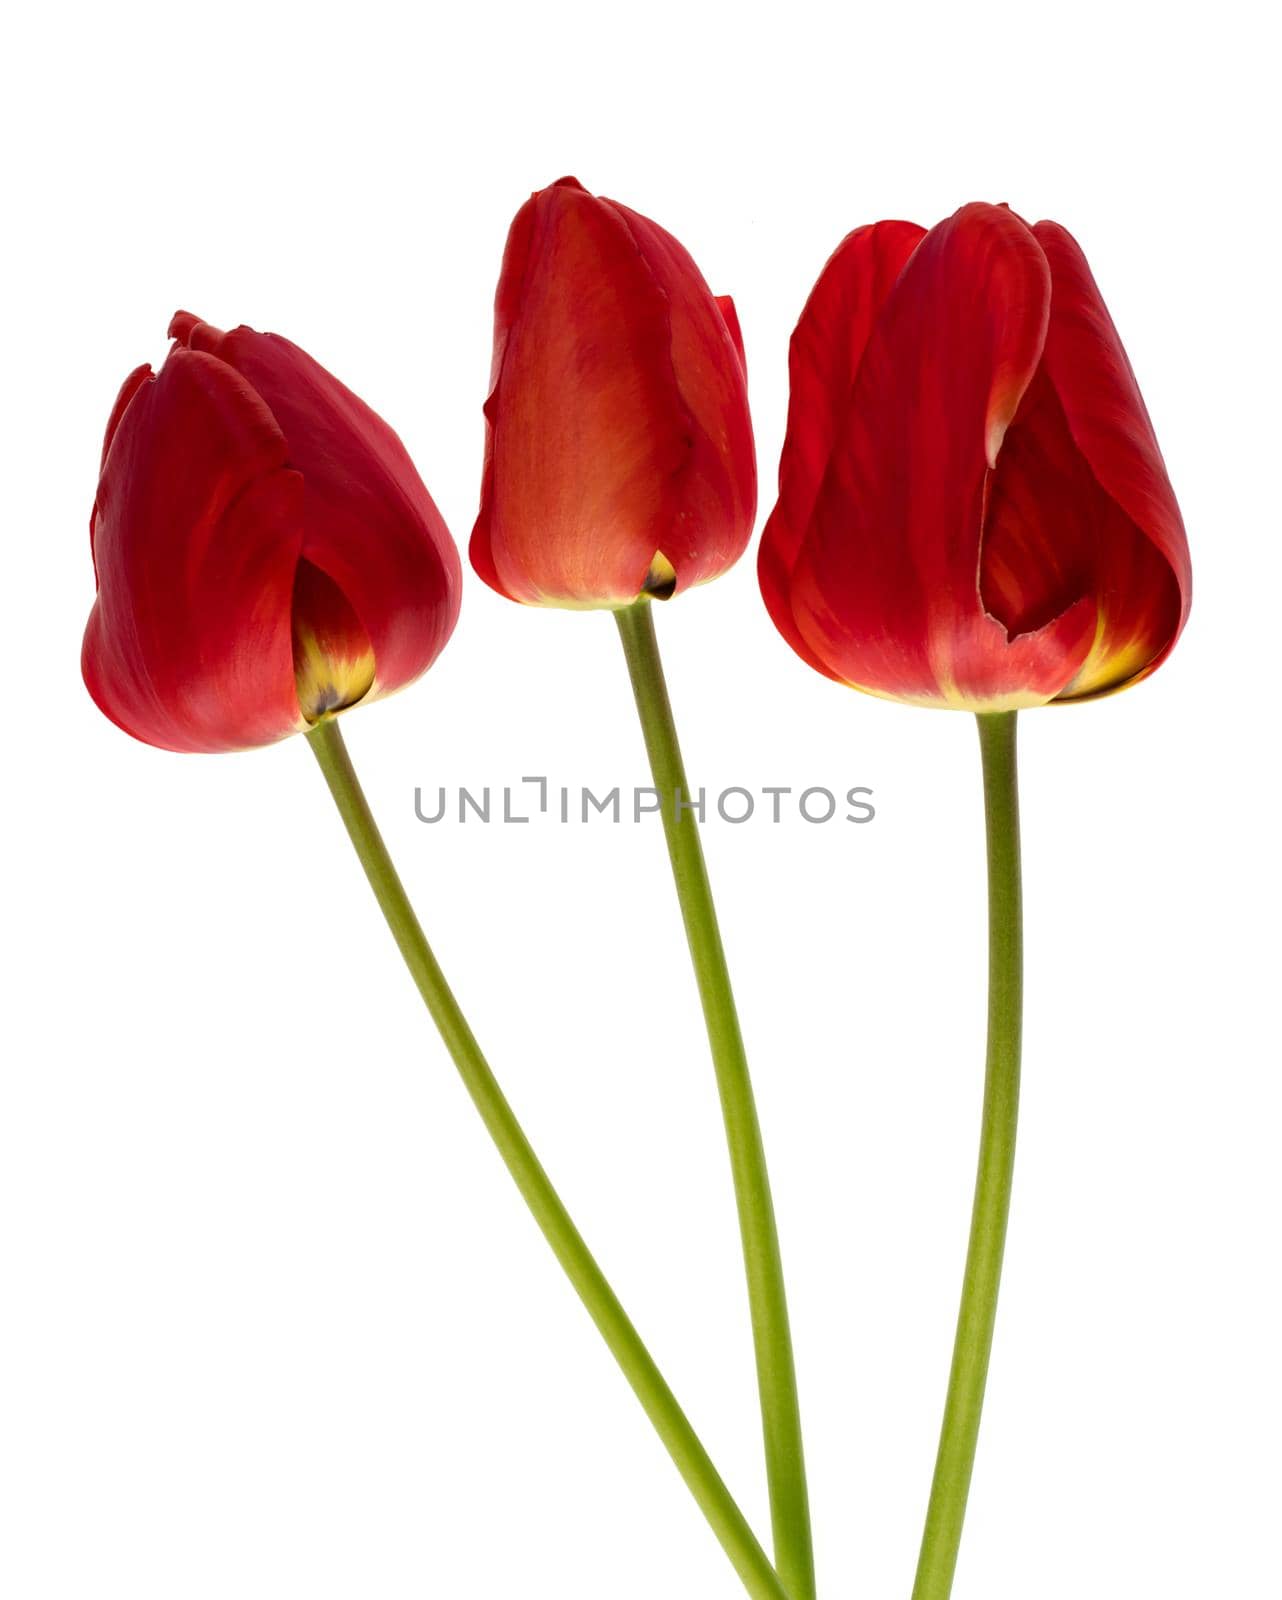 Three tulips with red petals, on a white background